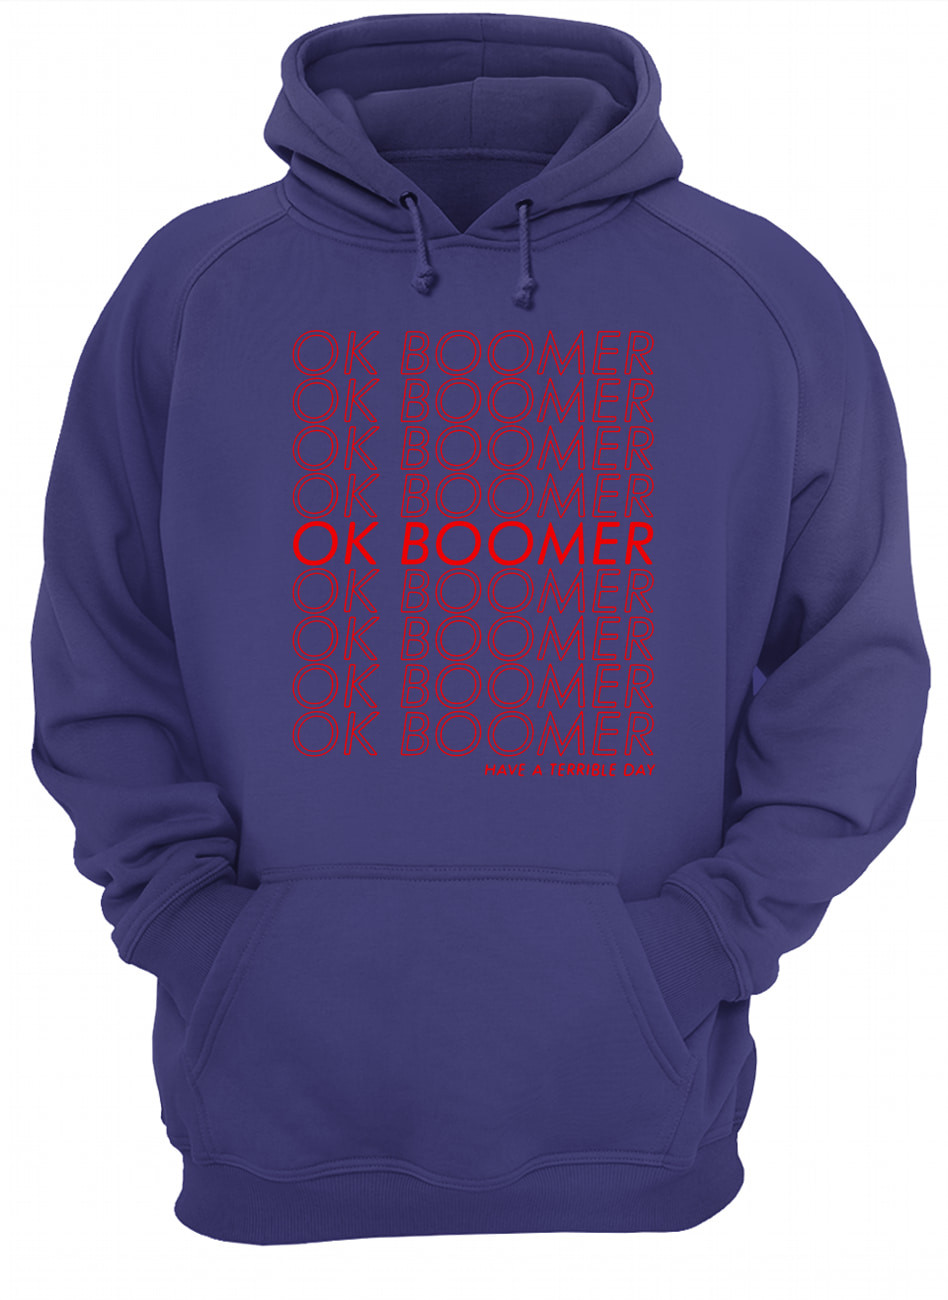 Ok boomer have a terrible day hoodie